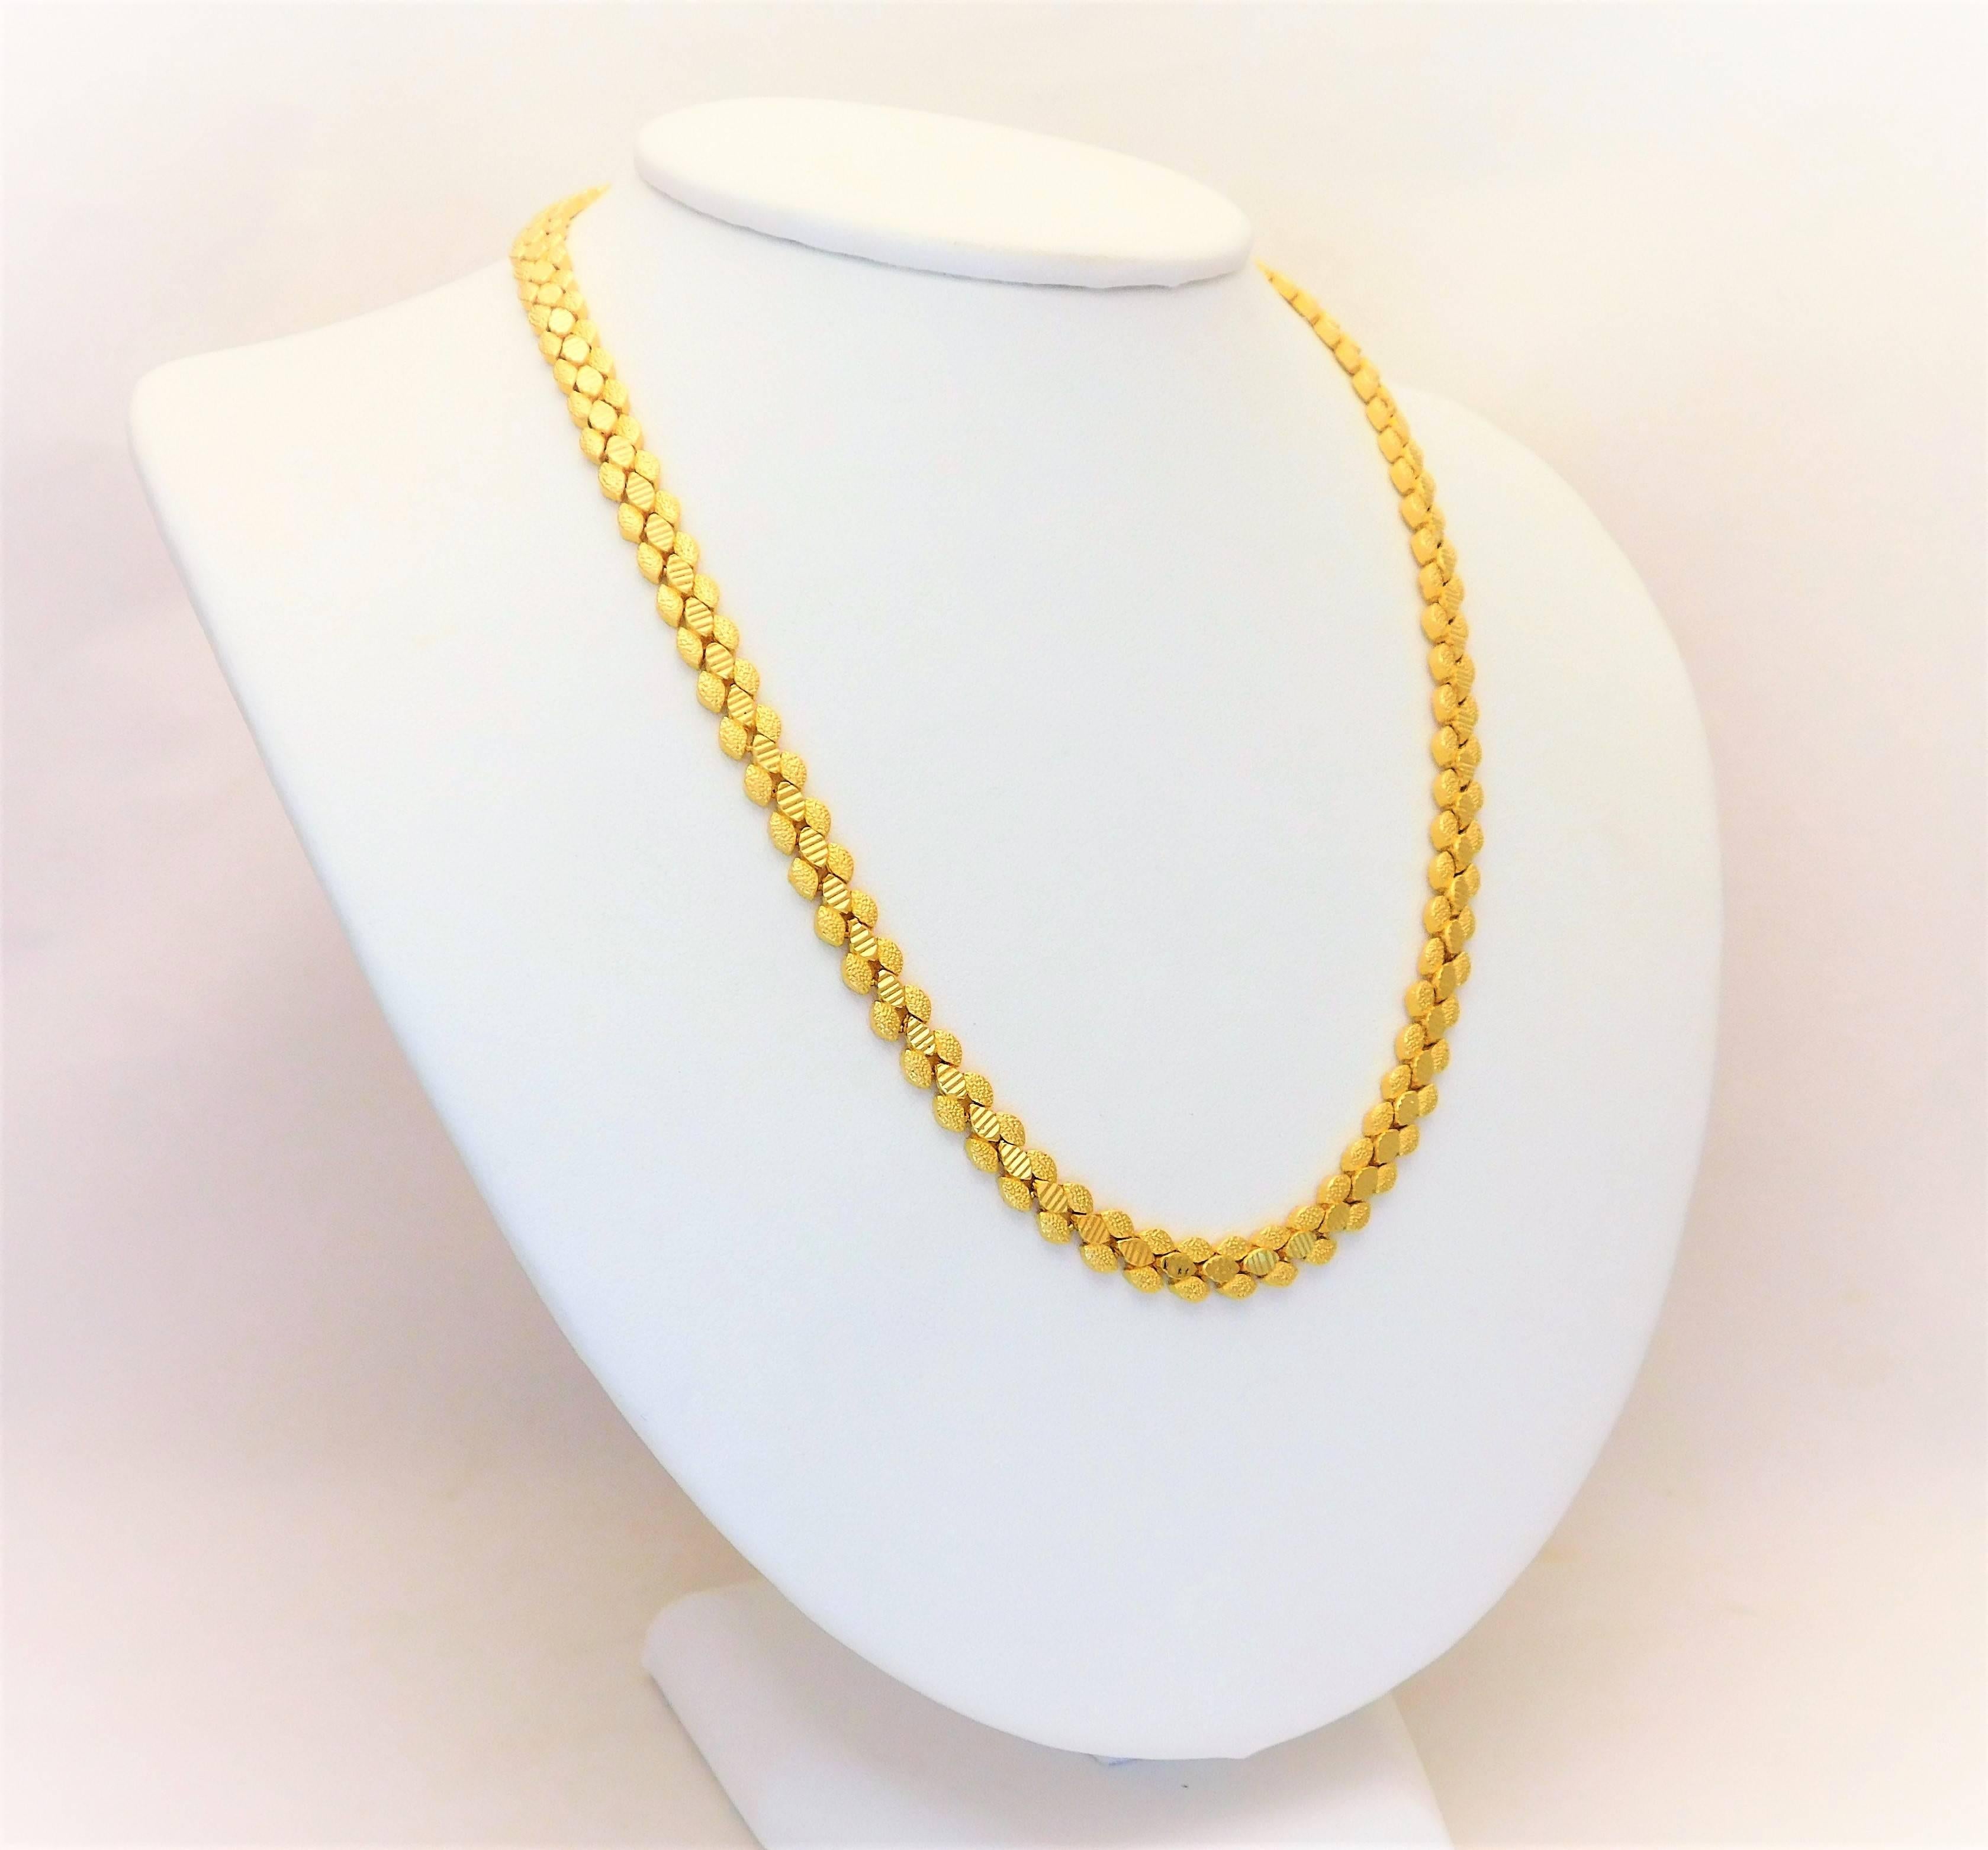 Circa 2000.   This gorgeous Mediterranean-style link necklace has been crafted in solid 14k yellow gold.  However, the bright and deep rich gold color gives the appearance of a 24k piece.  The time and effort put into the intricacy and detail of the